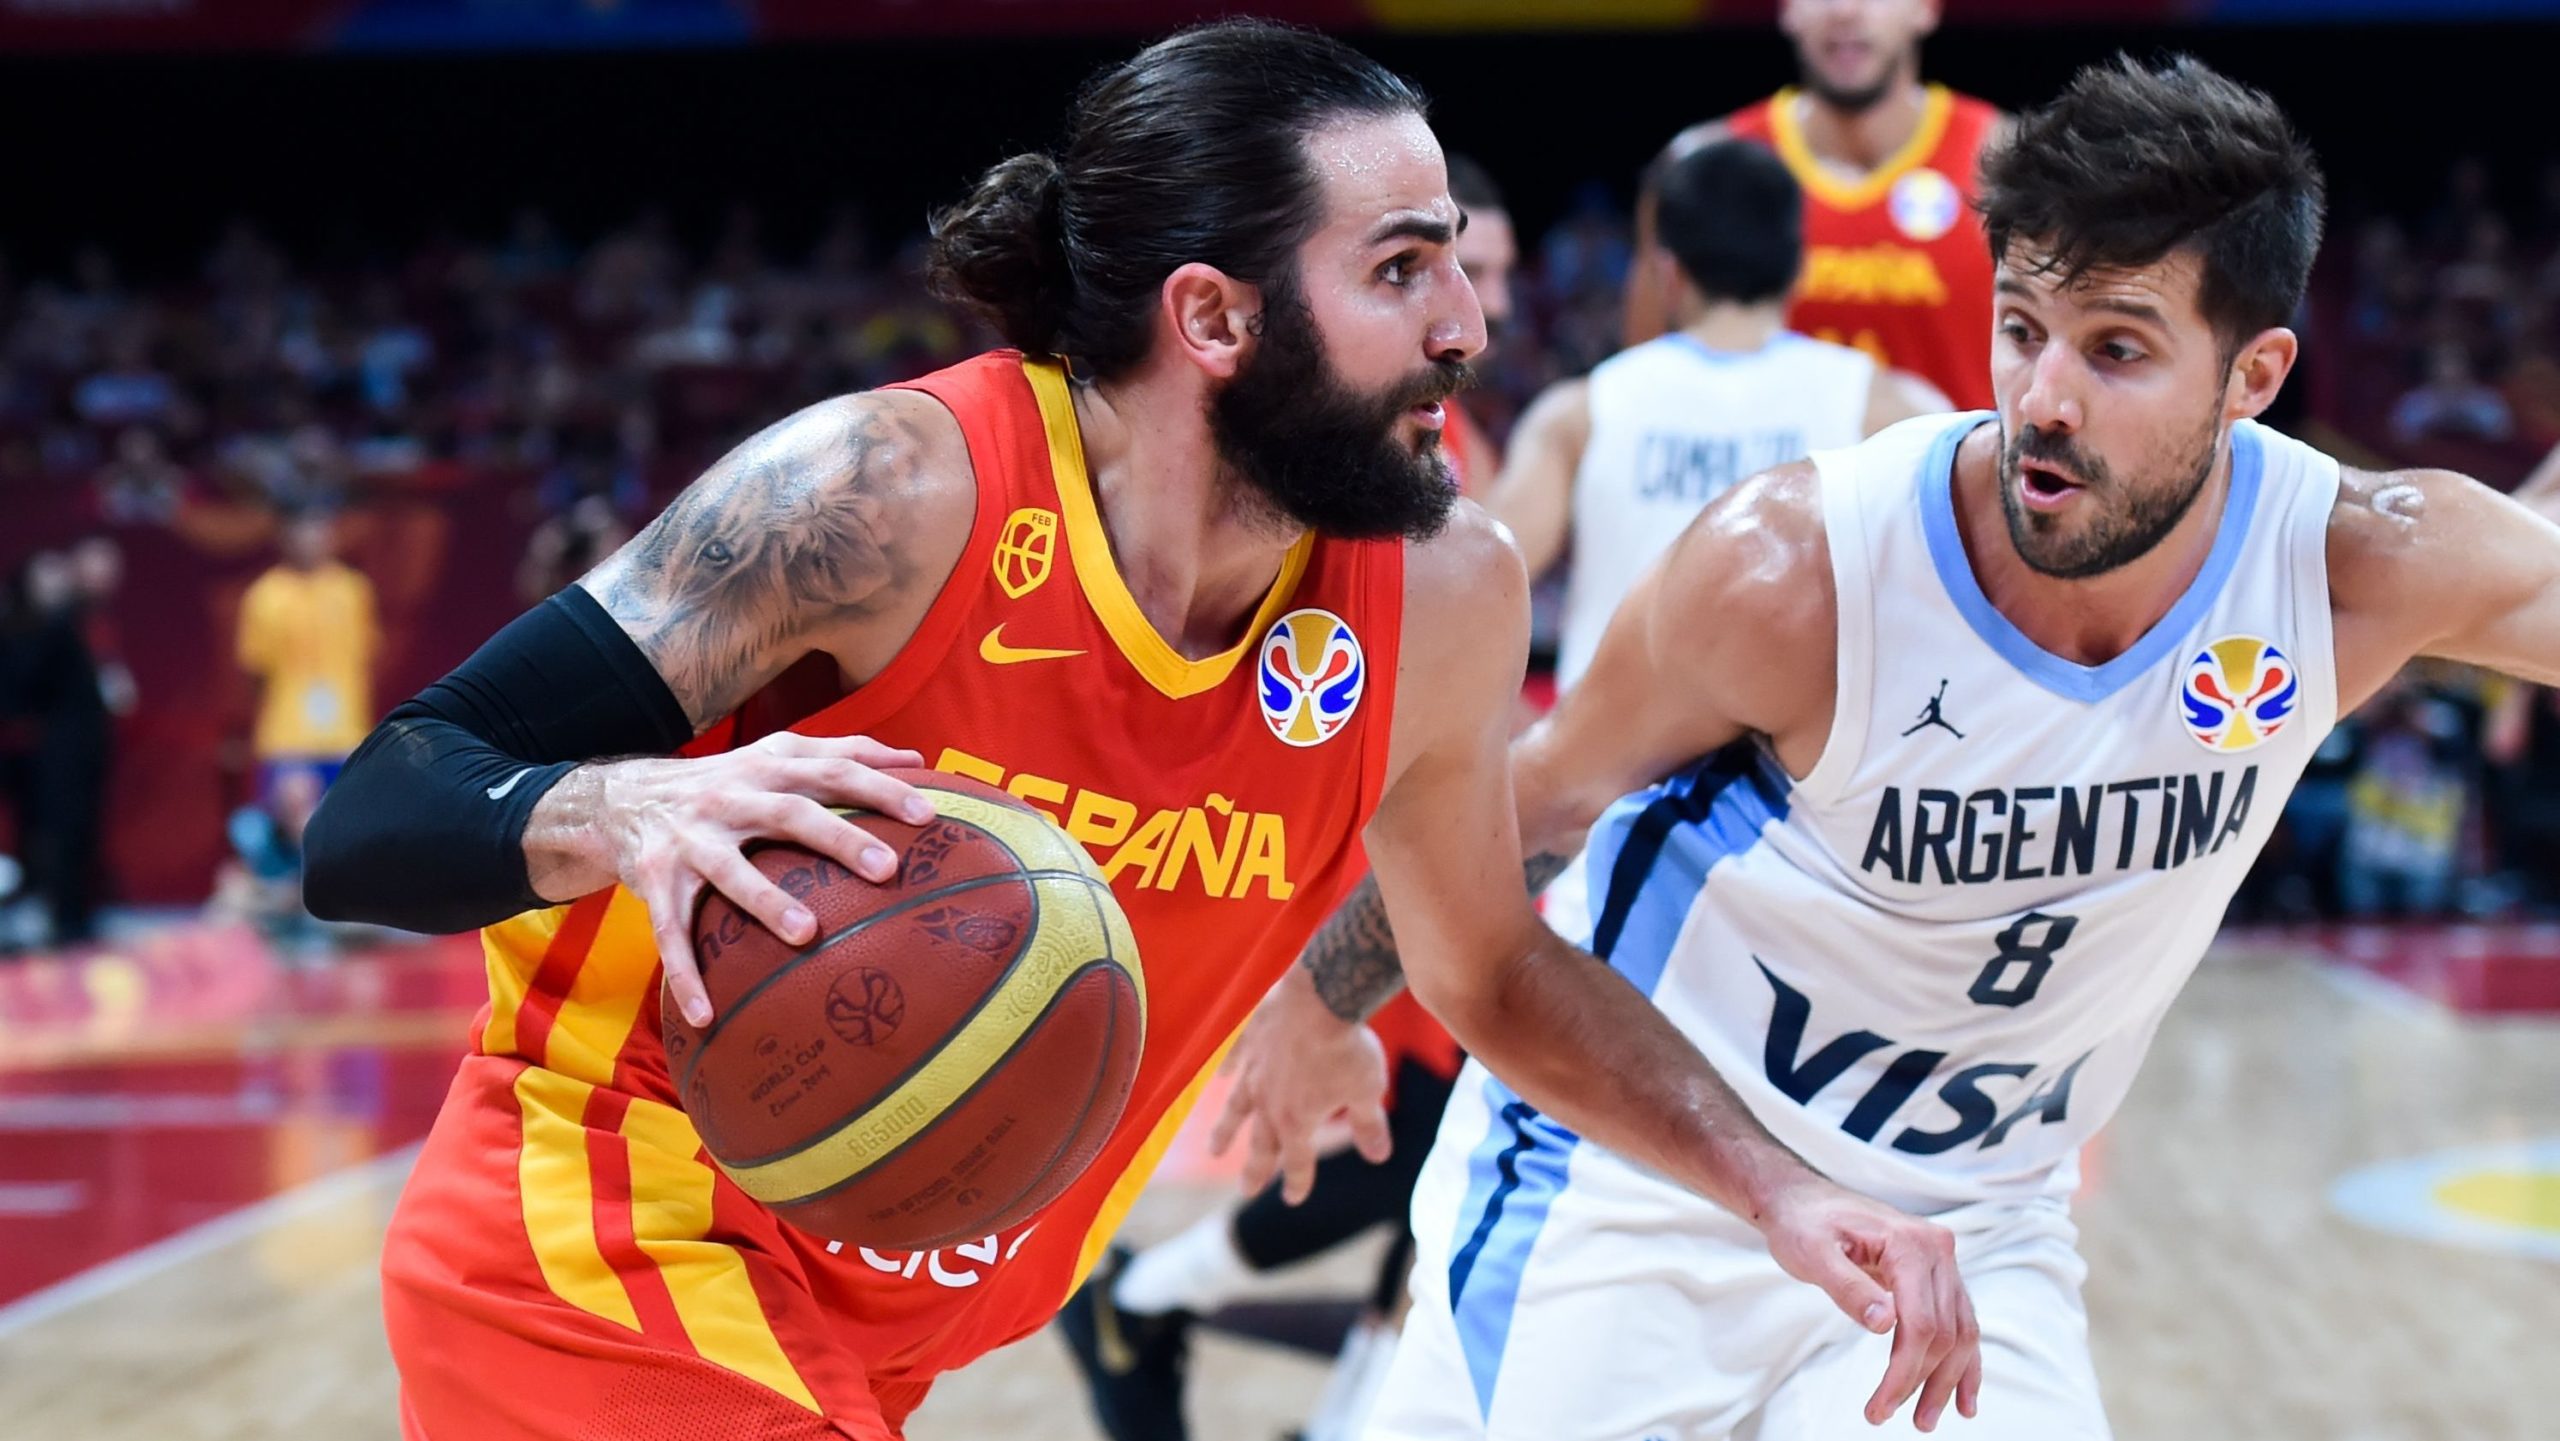 FIBA MVP Ricky Rubio Leads Spain To Win Over Argentina In World Cup Final